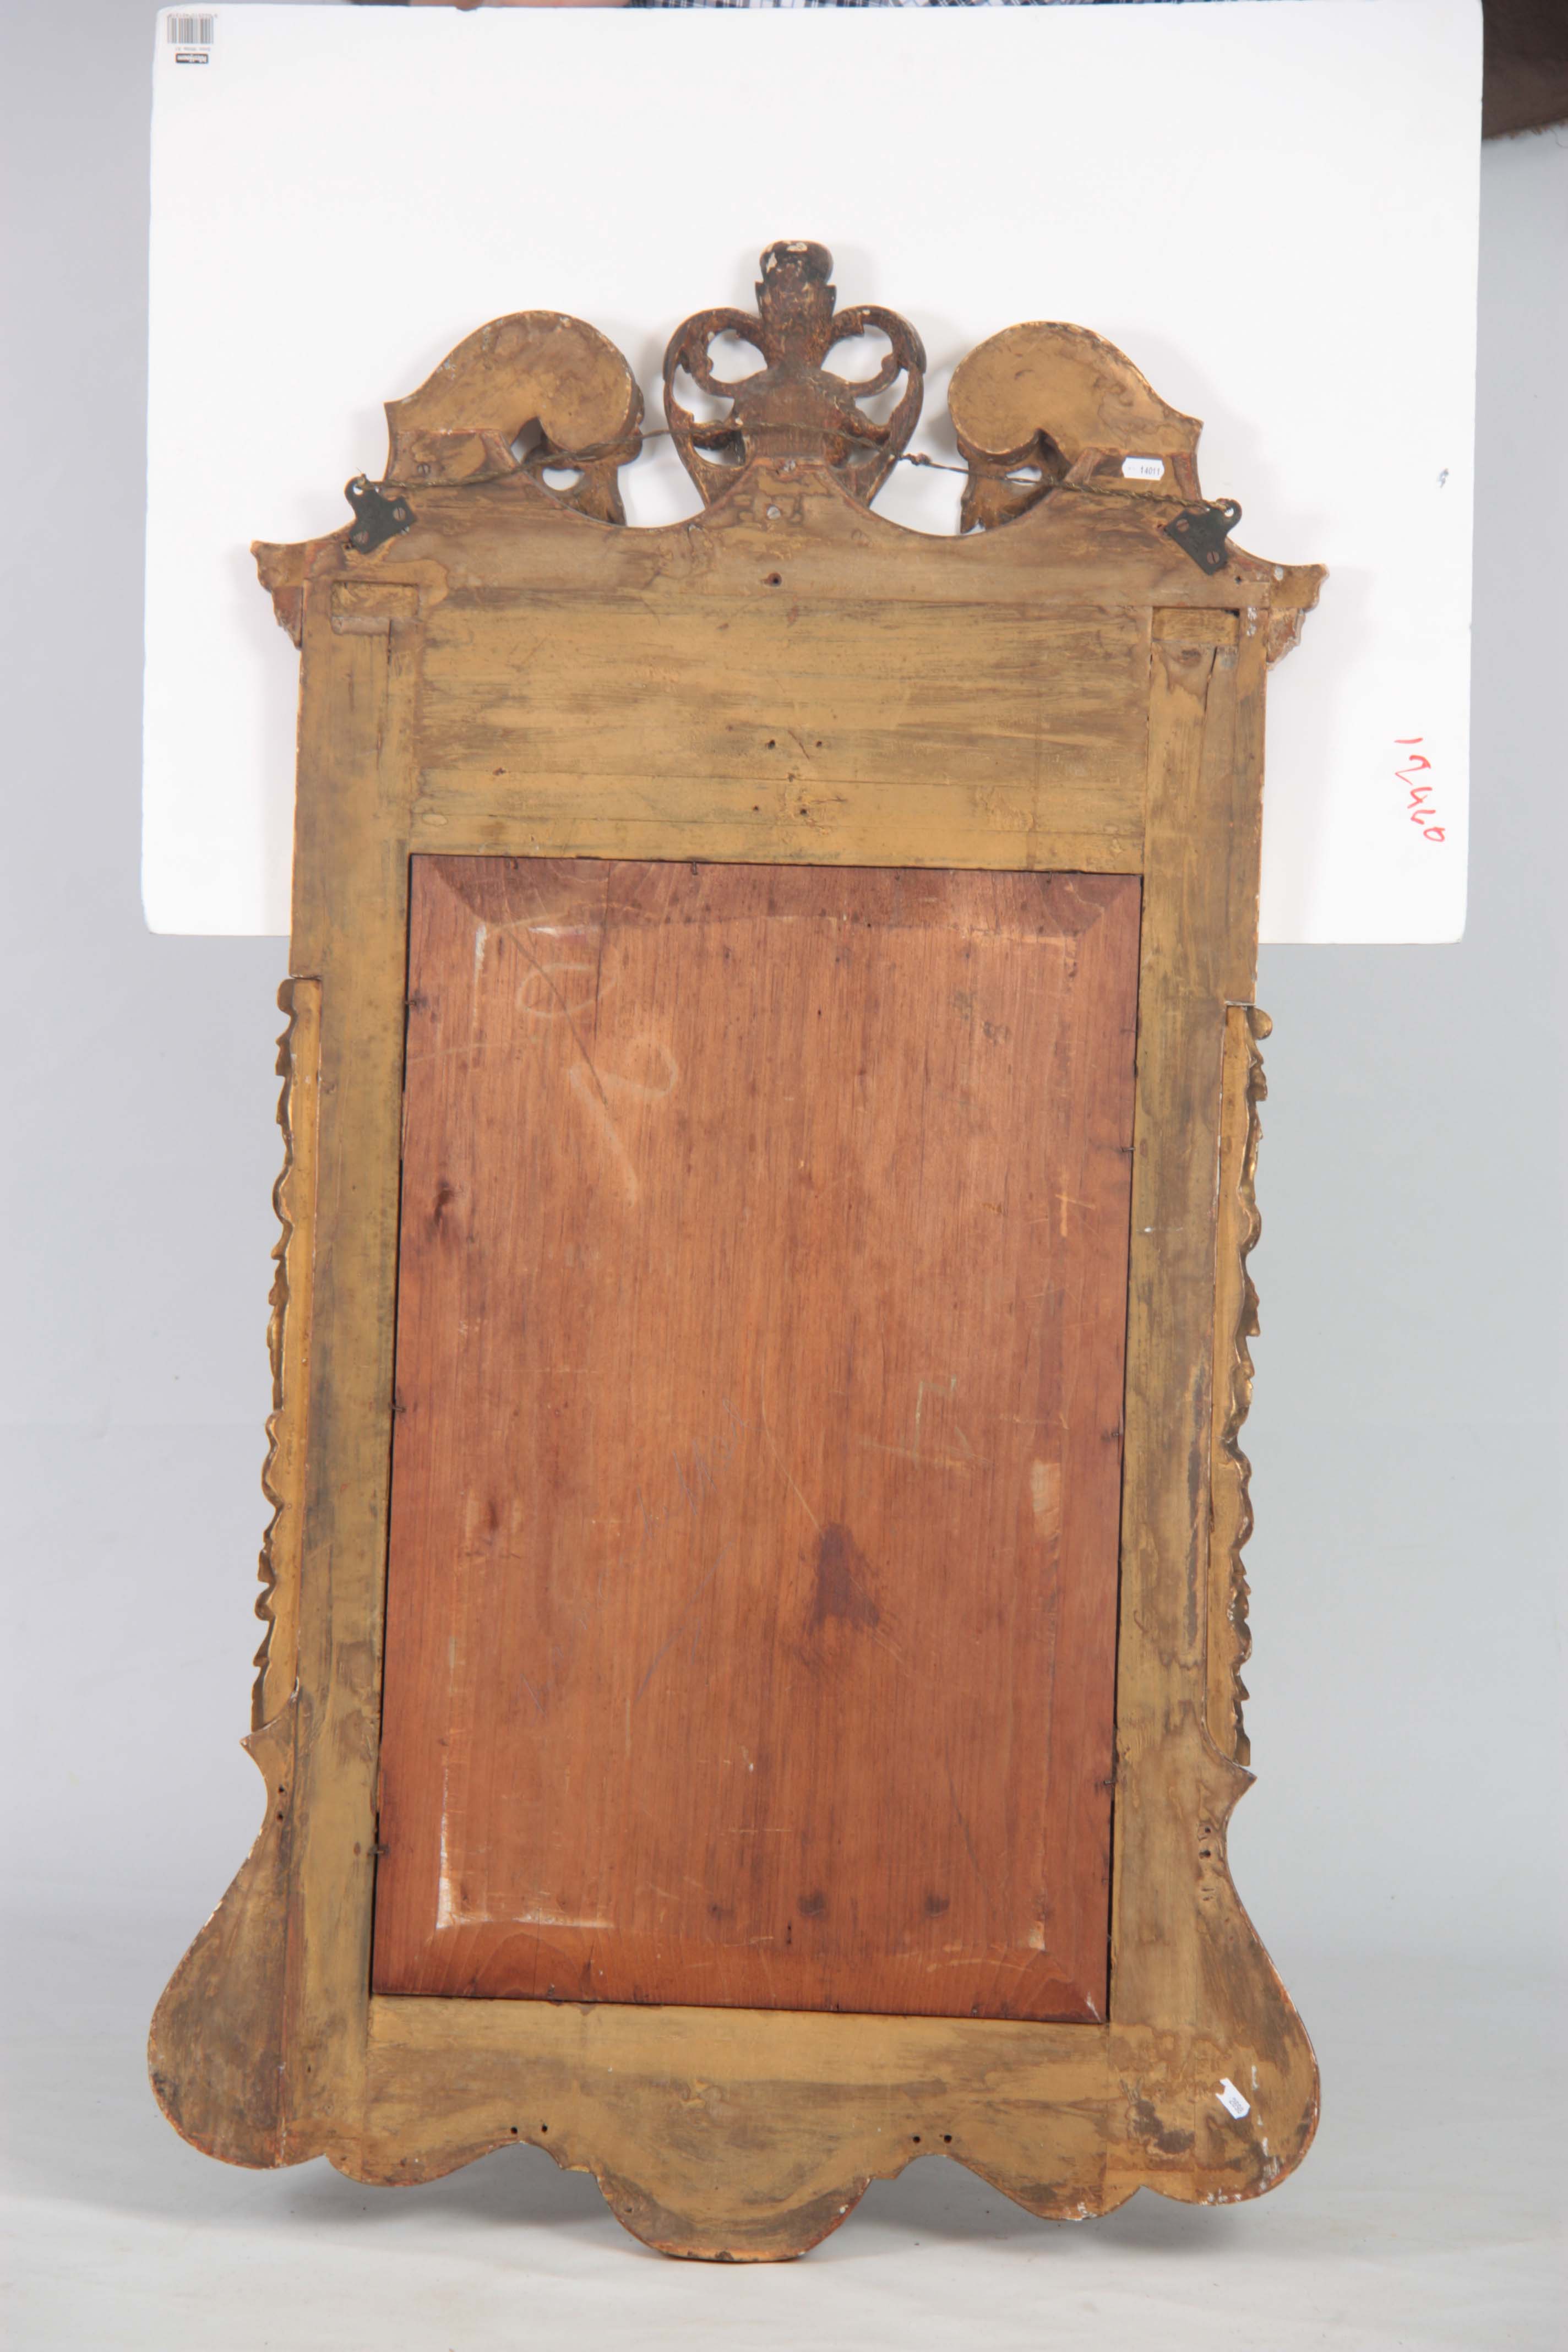 AN 18TH CENTURY MAHOGANY AND PARCEL GILT HANGING MIRROR with elaborate swan neck and shellwork - Image 5 of 5